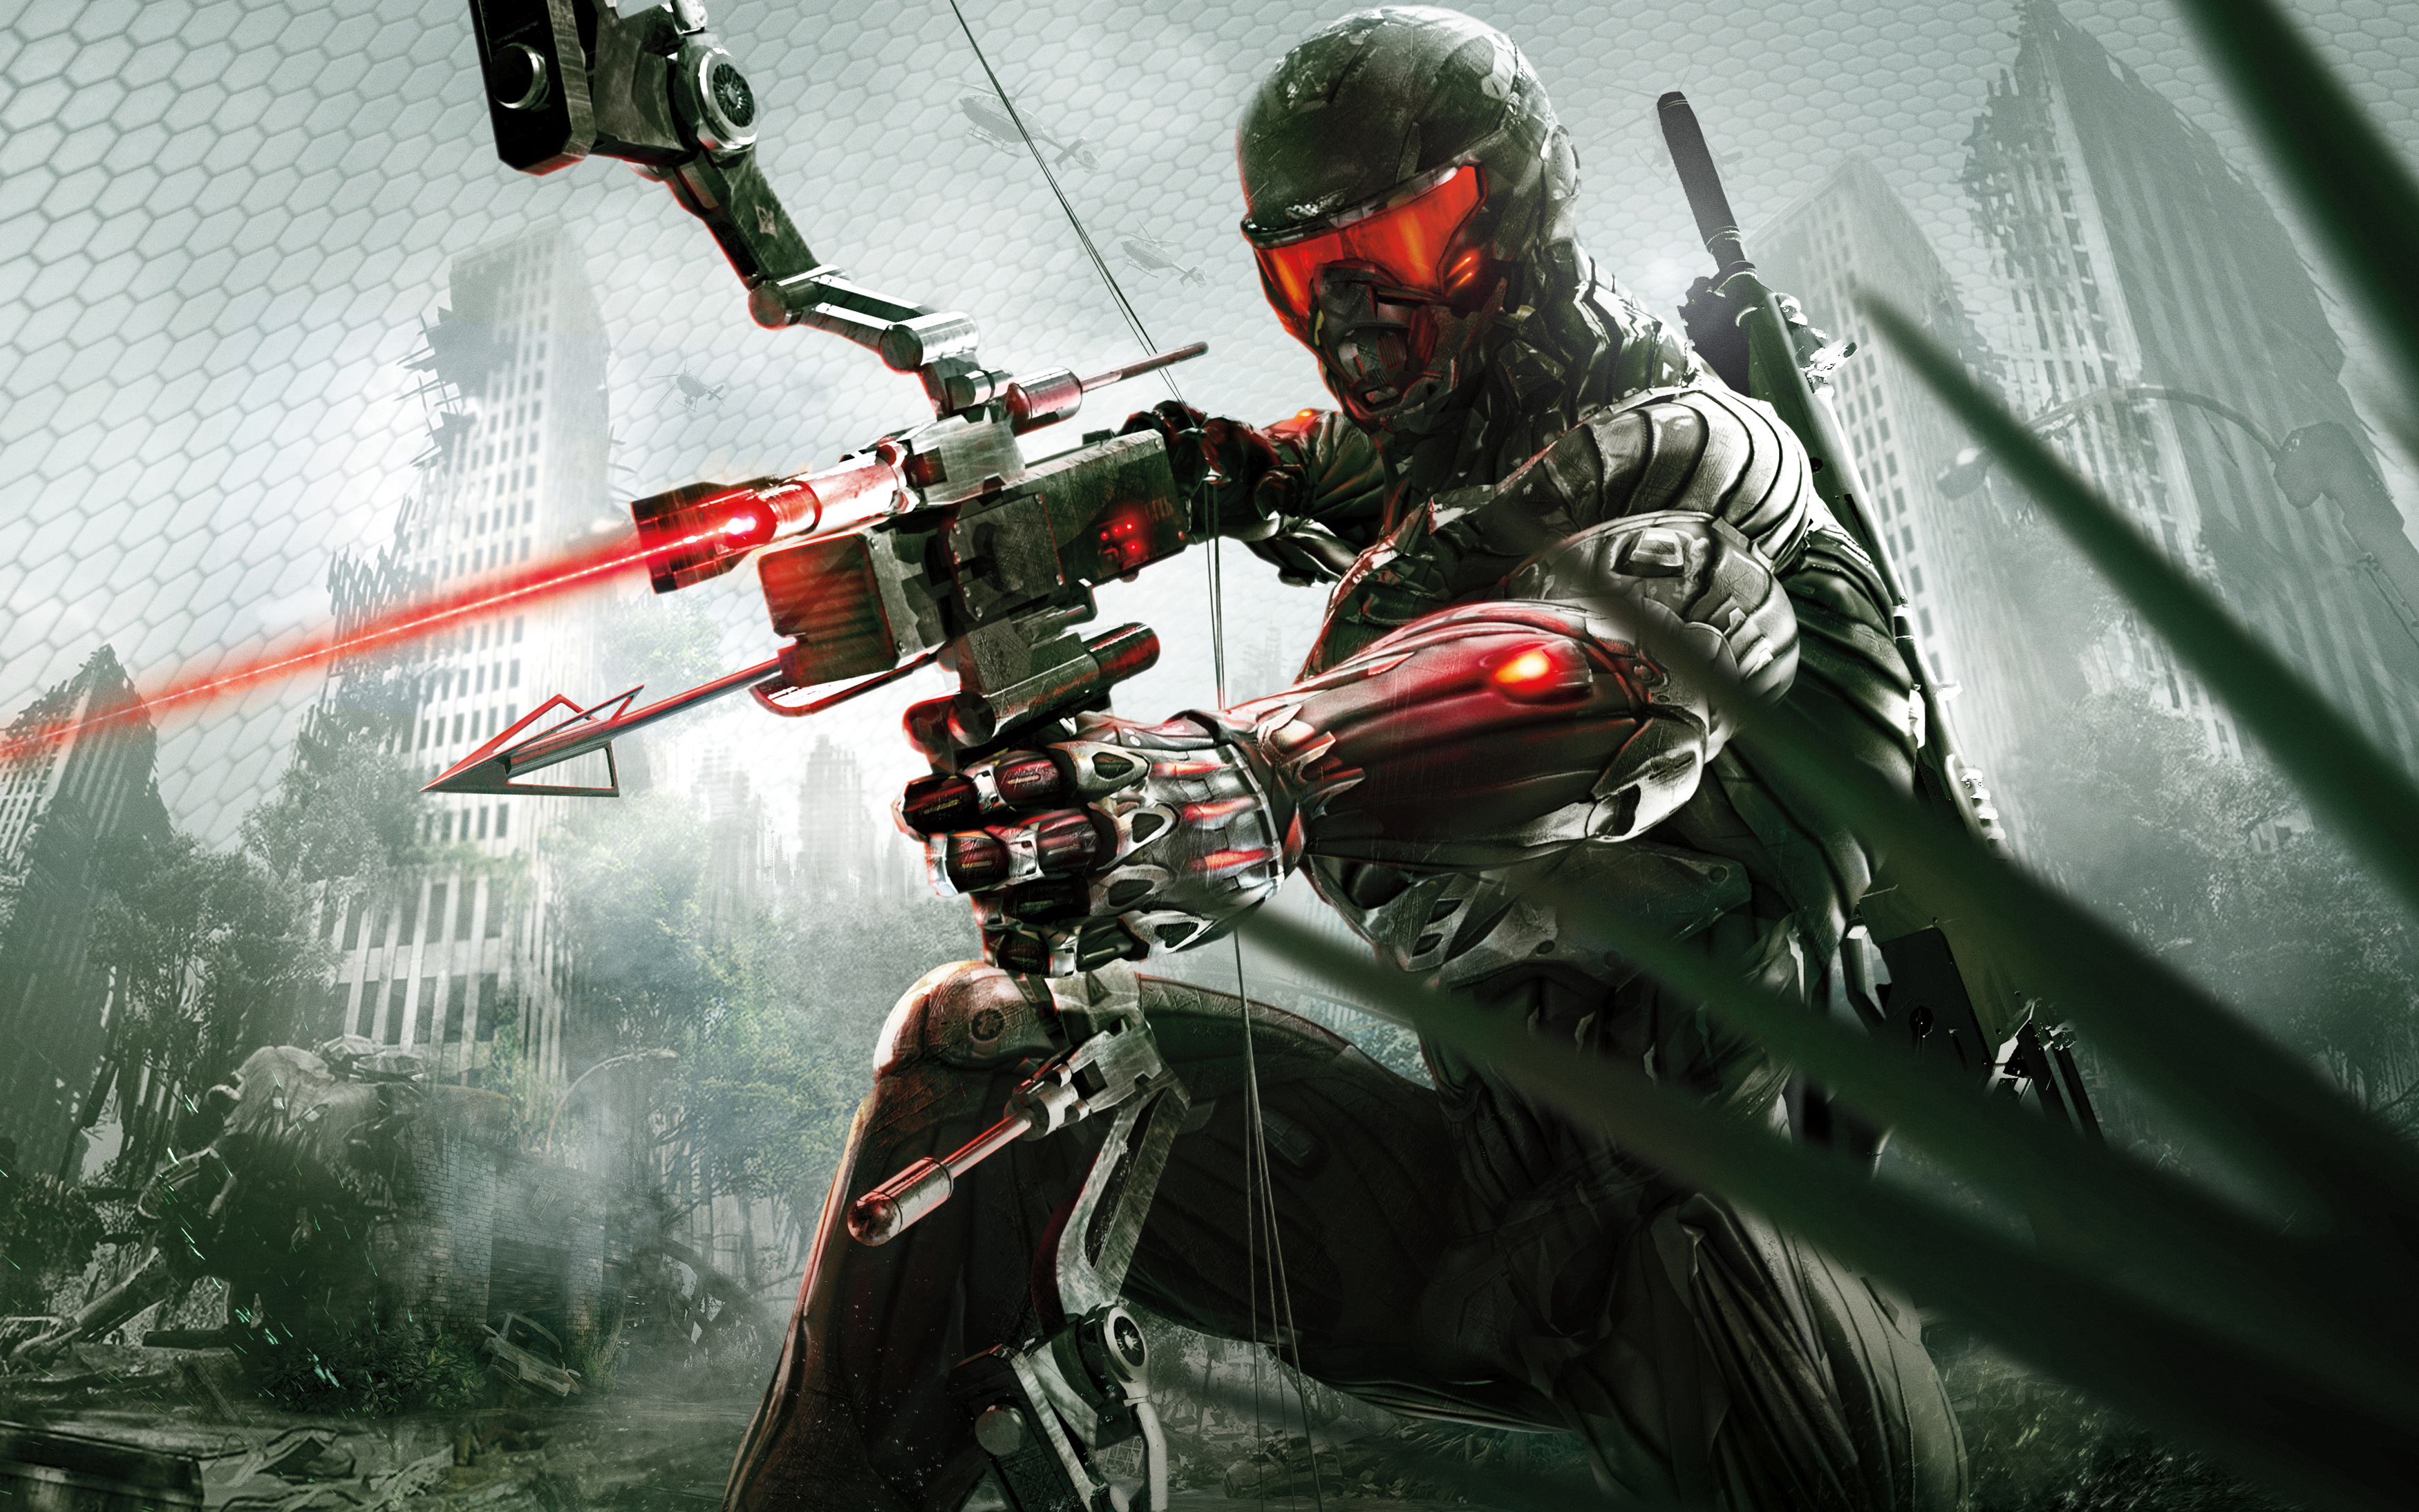 2013 Crysis 3 Wallpapers HD Wallpapers 3500x2188